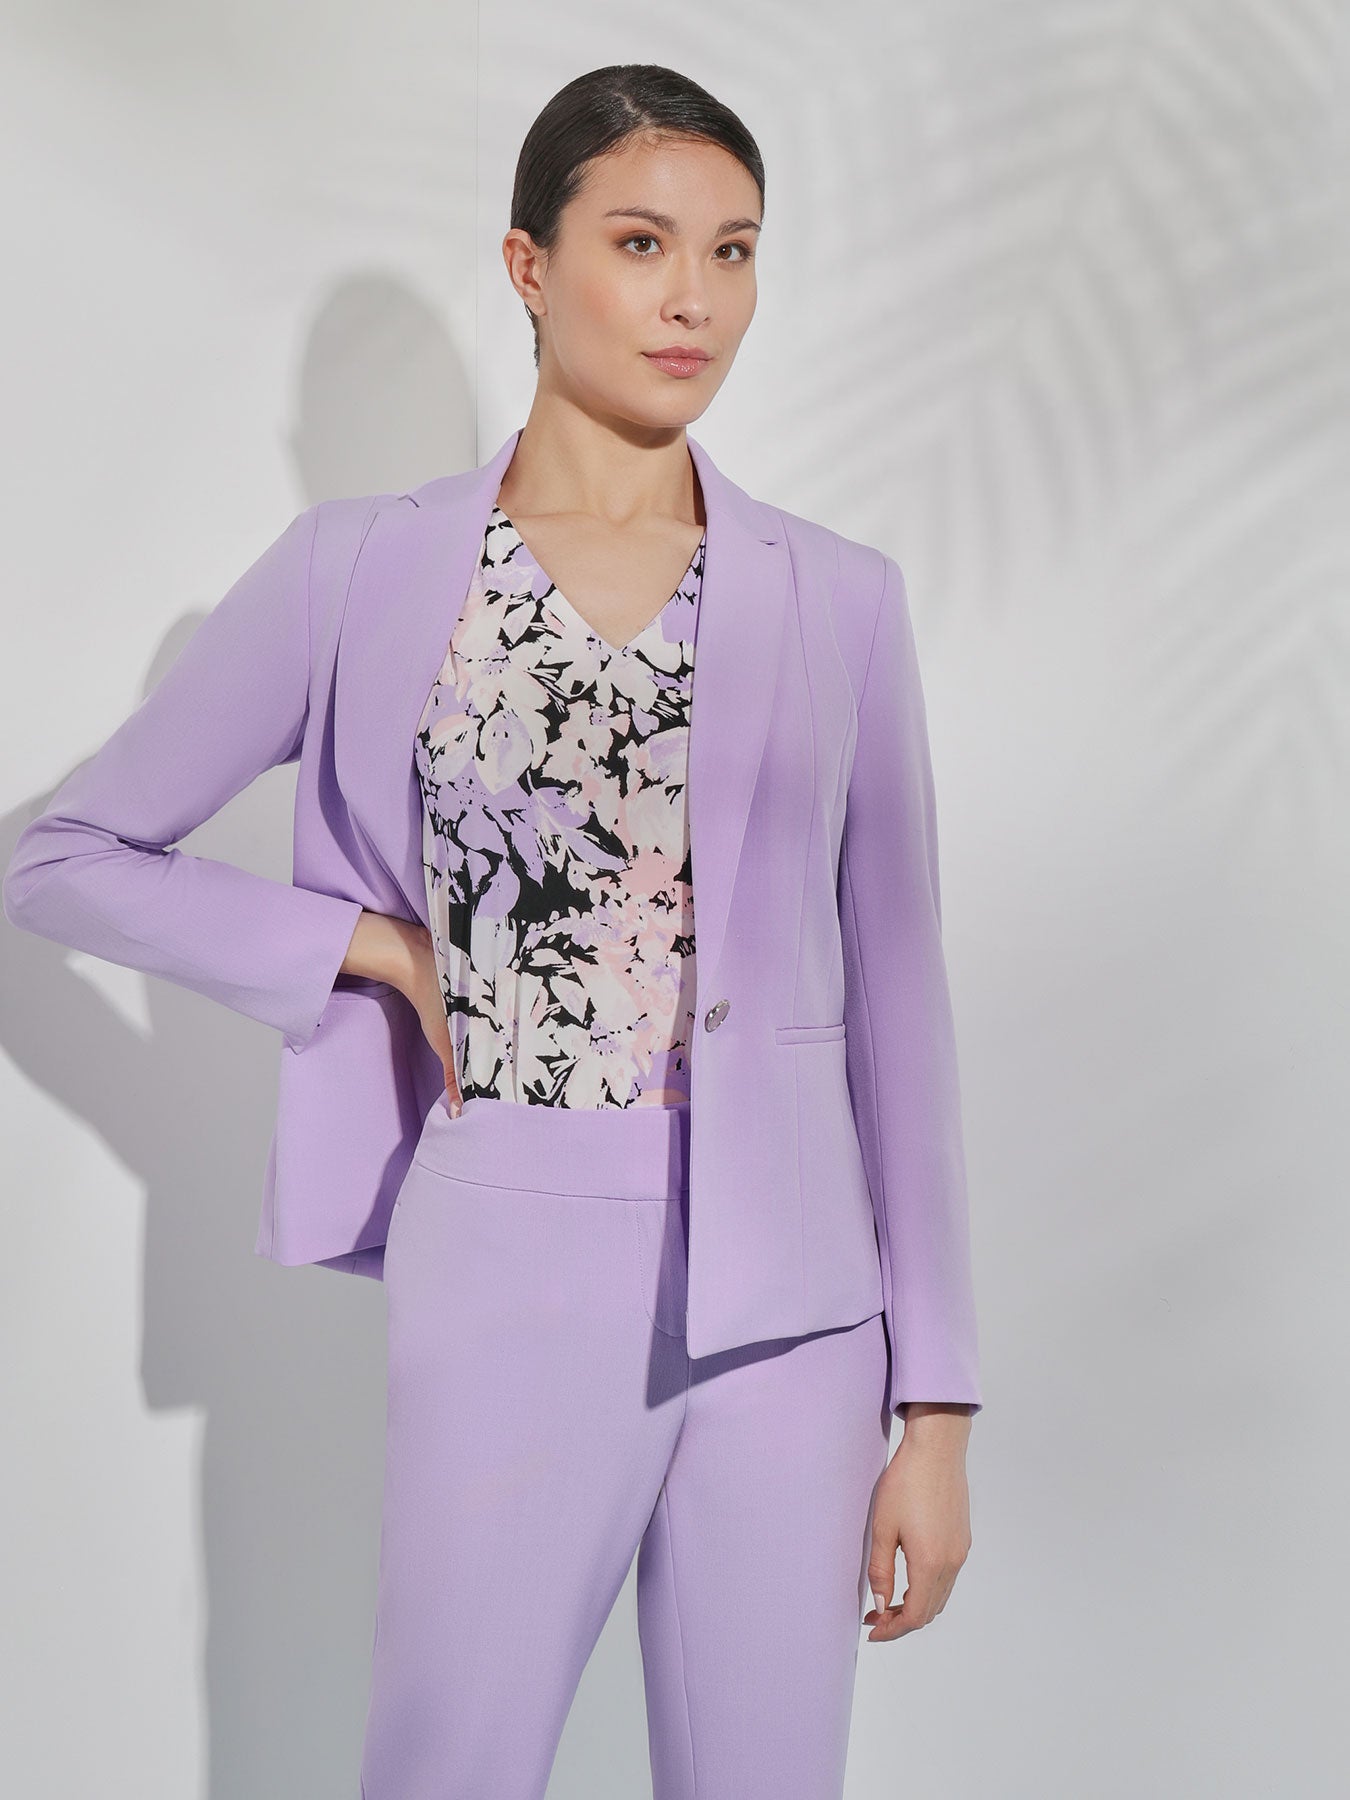 Suwequest Women's Double Blazer Breasted Buttons Slim Fitting Purple Blazer  Jacket Lavender S at Amazon Women's Clothing store